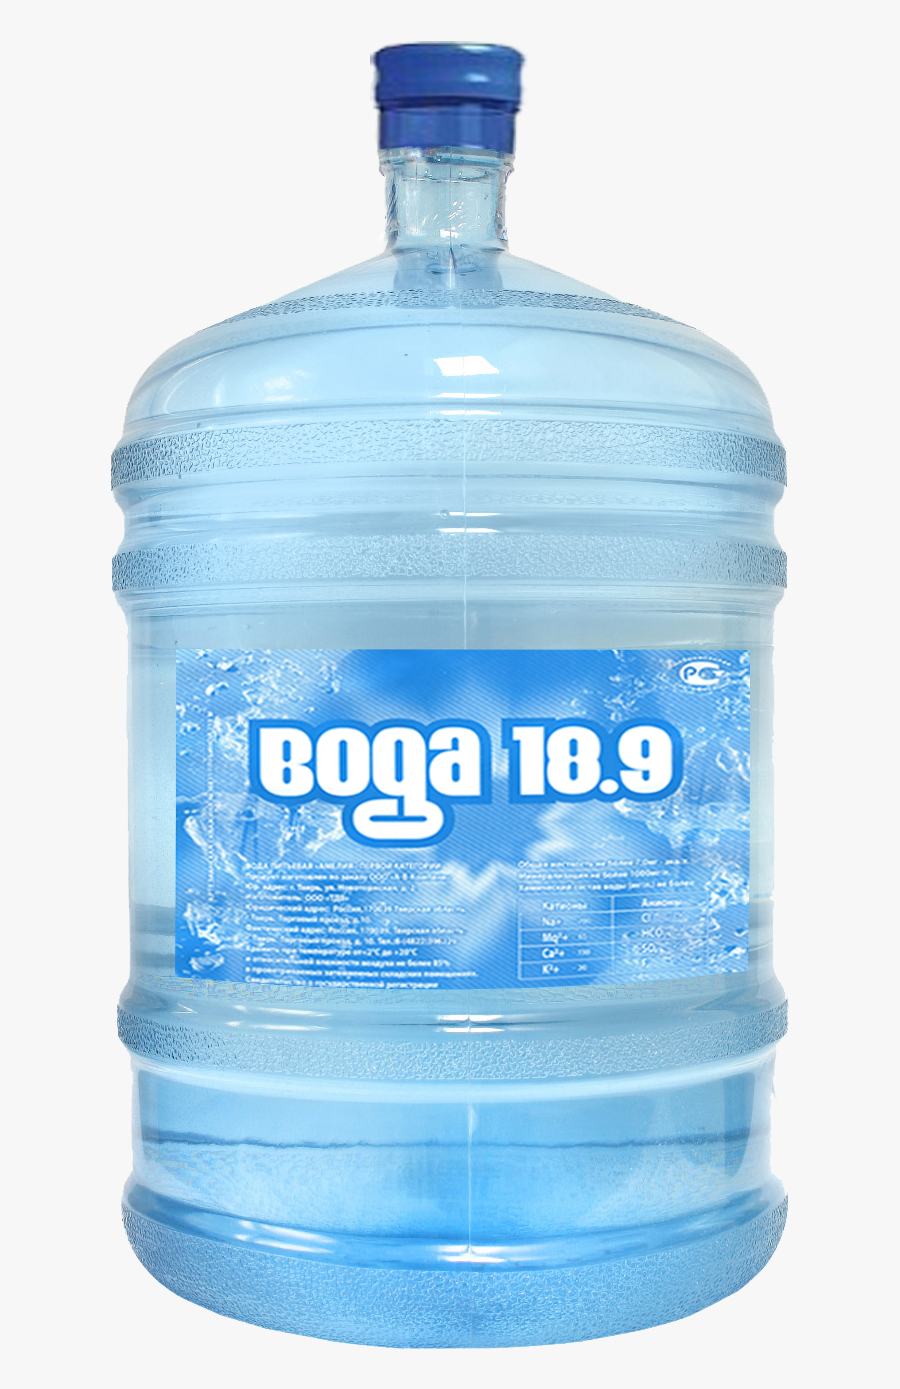 Mineral Water Bottle Png, Transparent Clipart